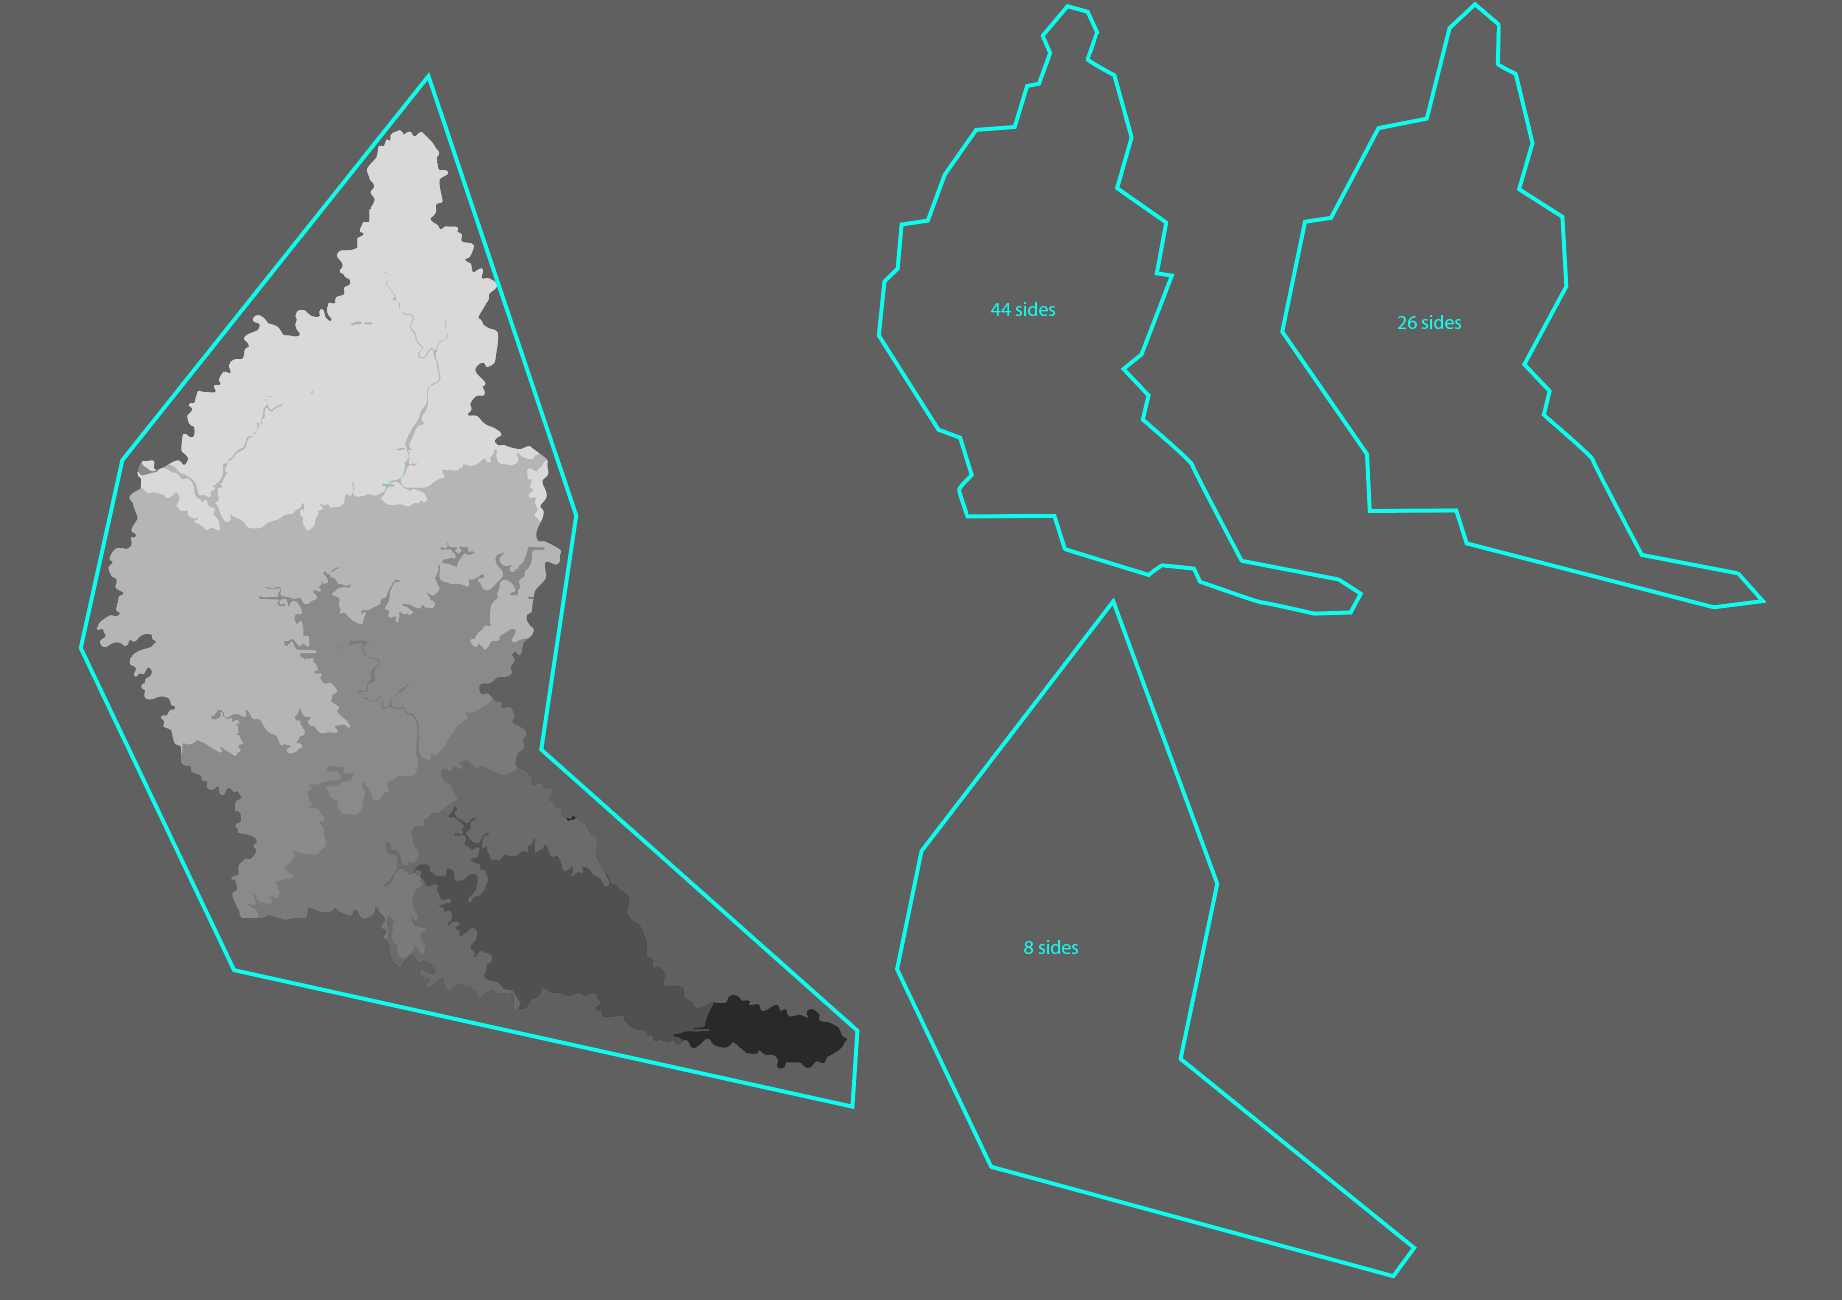 the watershed shapes - heightmap in grey, basin shapes in blue